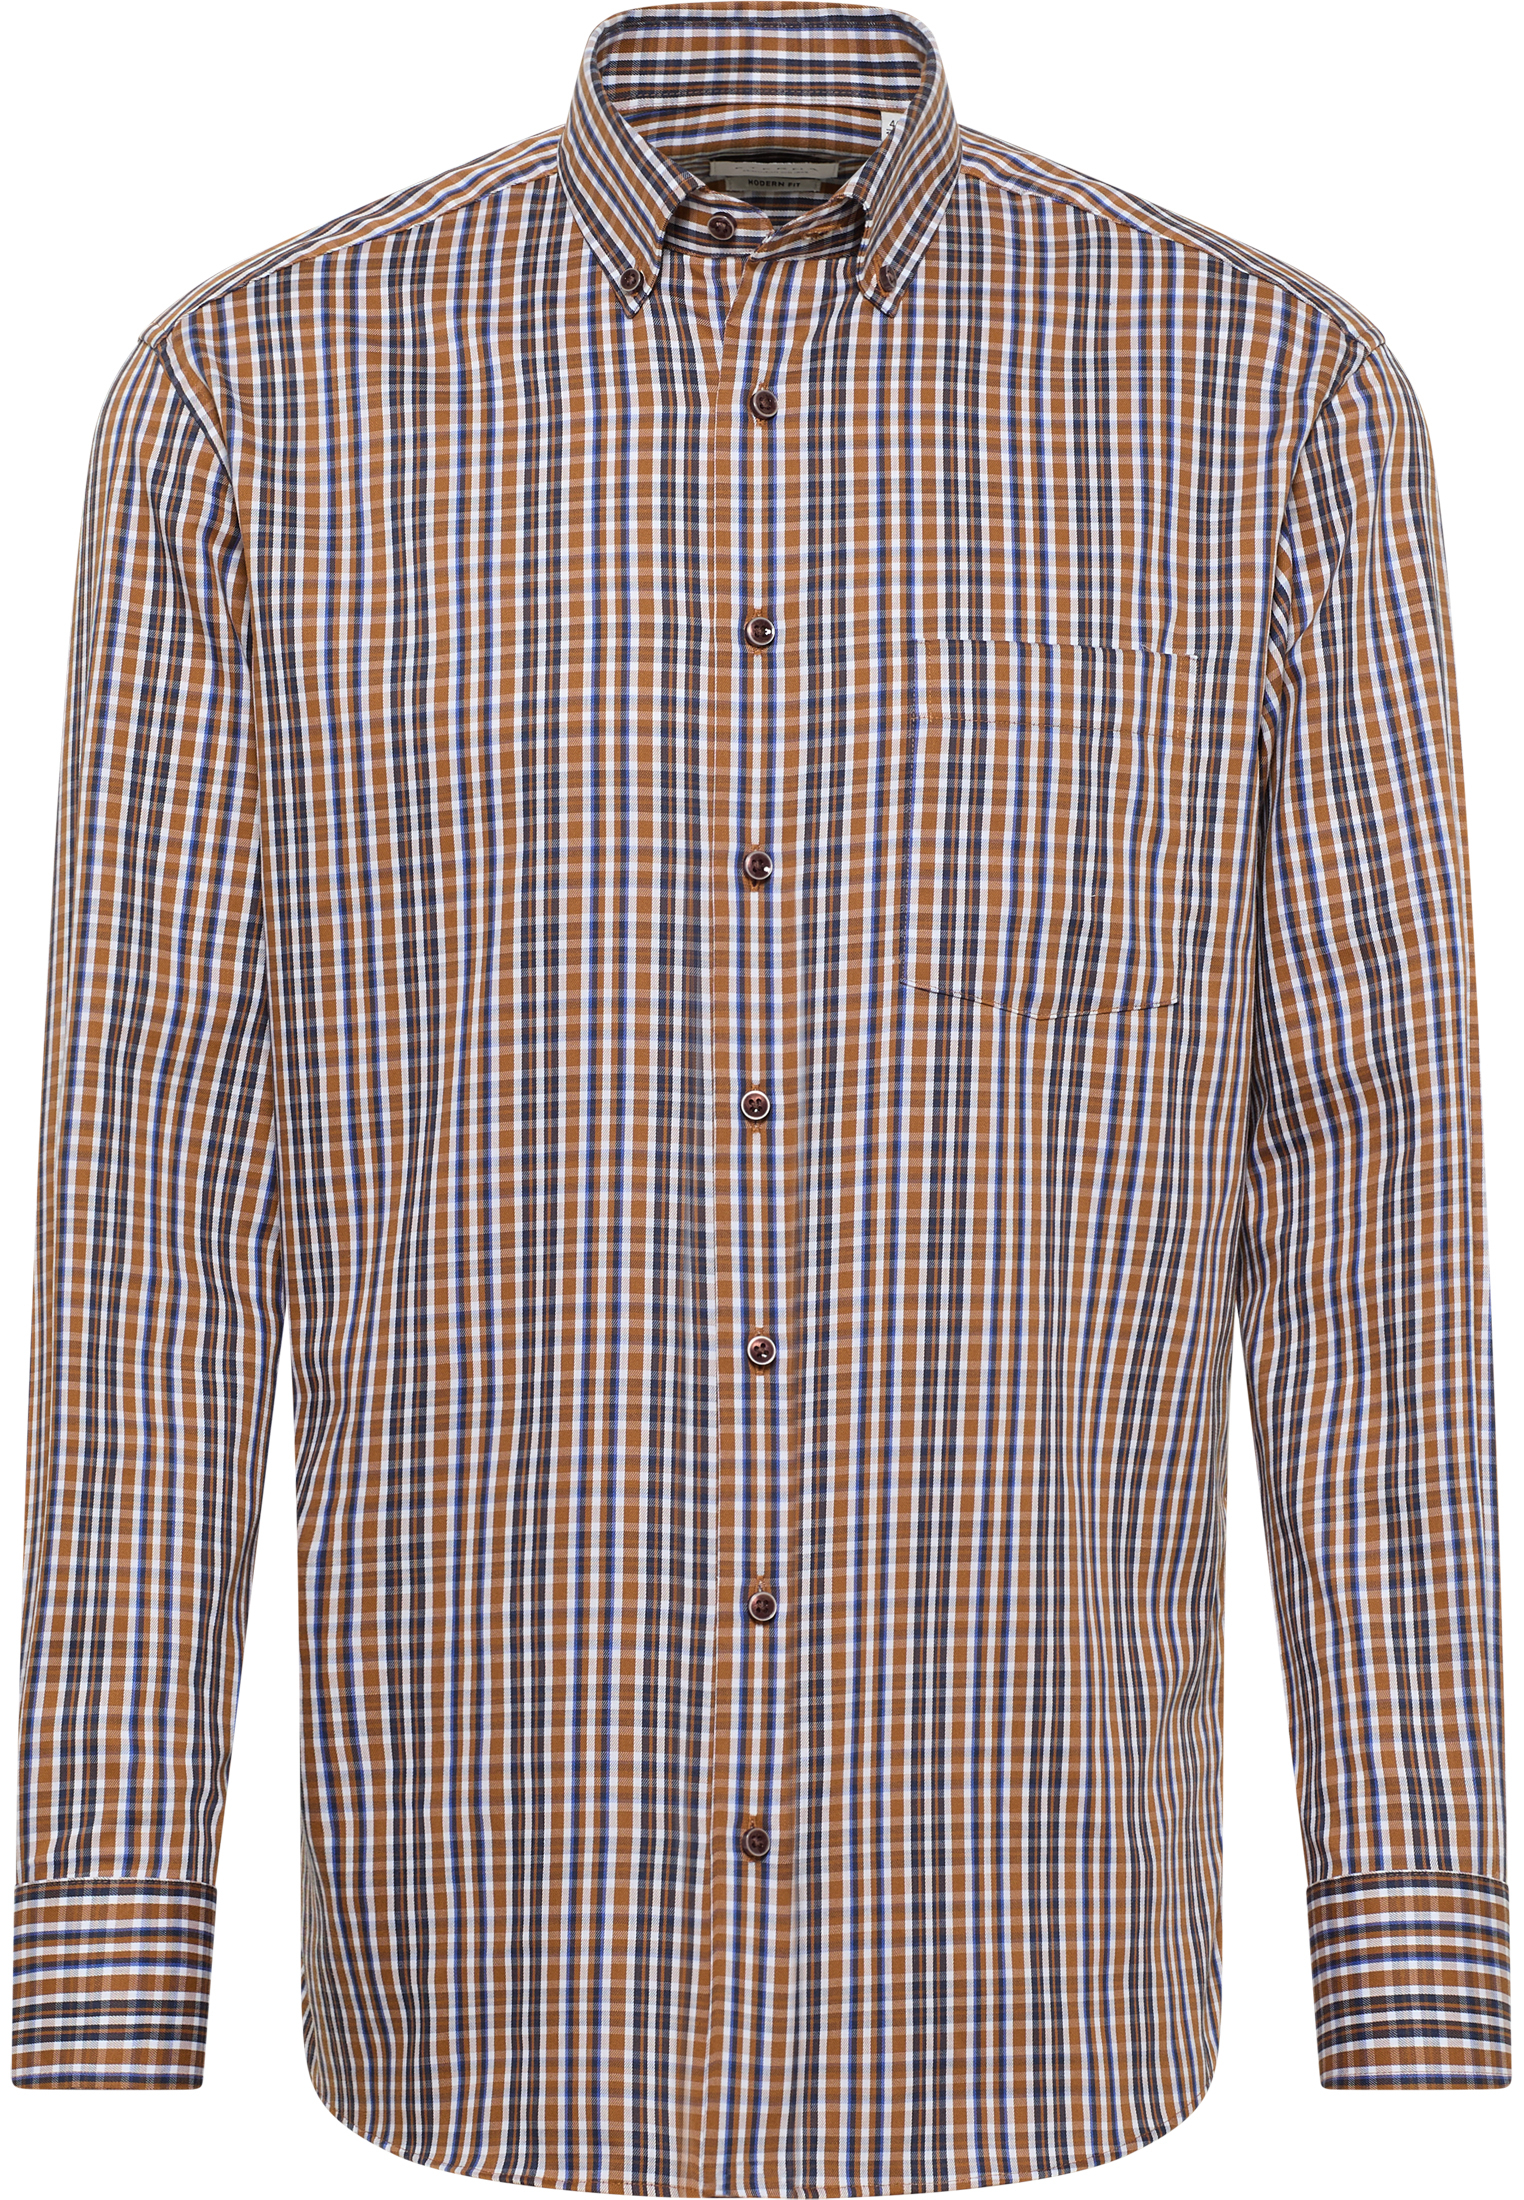 MODERN FIT Shirt in brown checkered